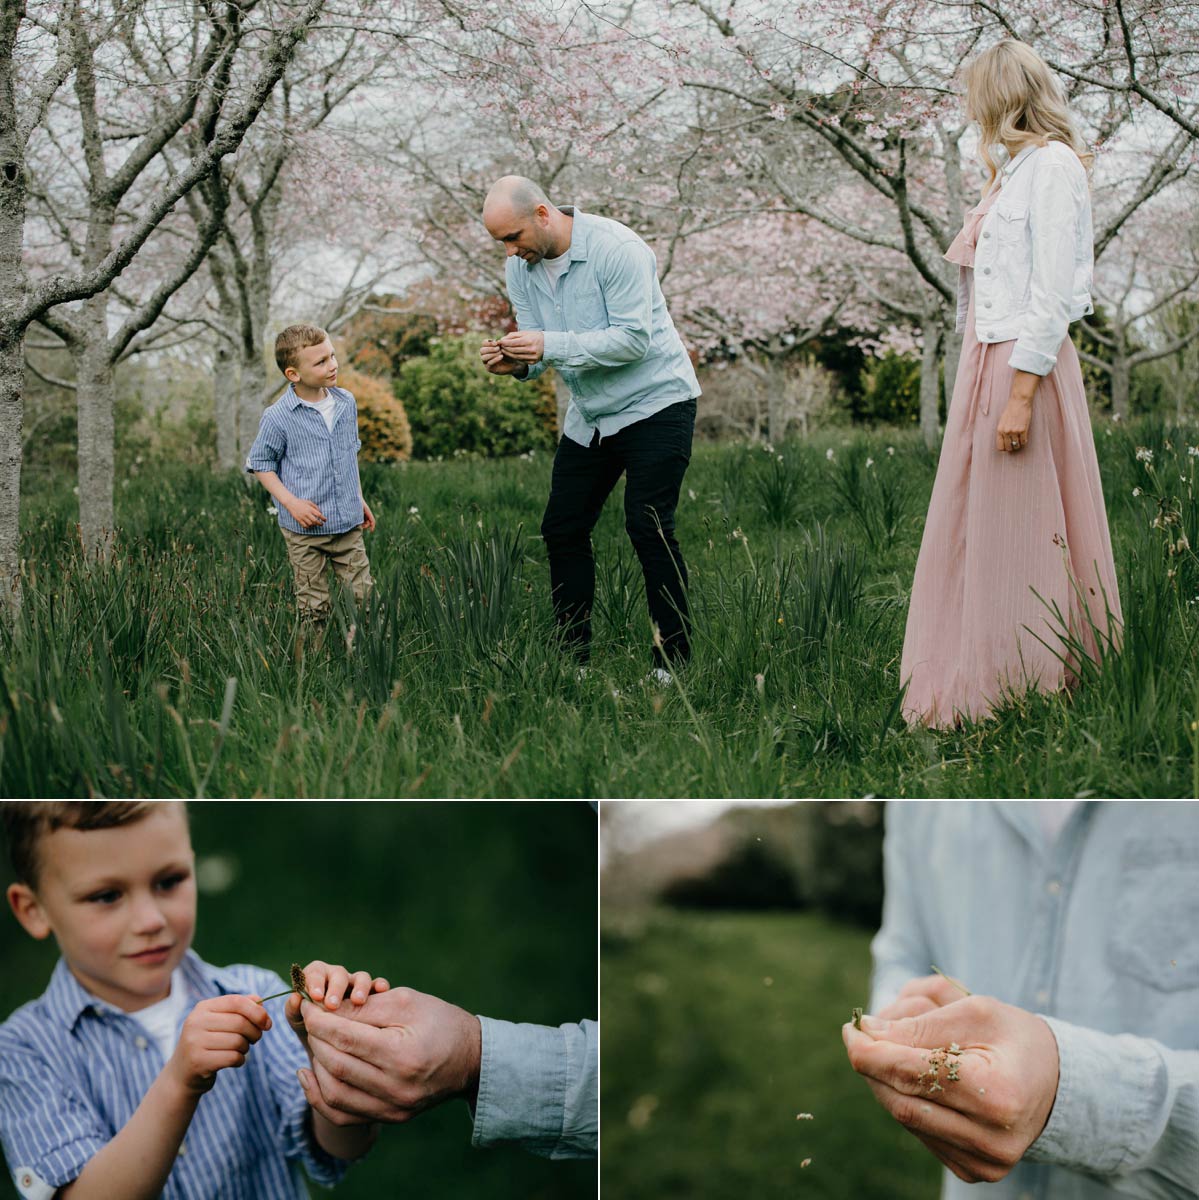 family exploring in auckland botanic gardens during a portrait photo session in spring cherry blossoms and daffodils season with sarah weber photography spring family photos auckland